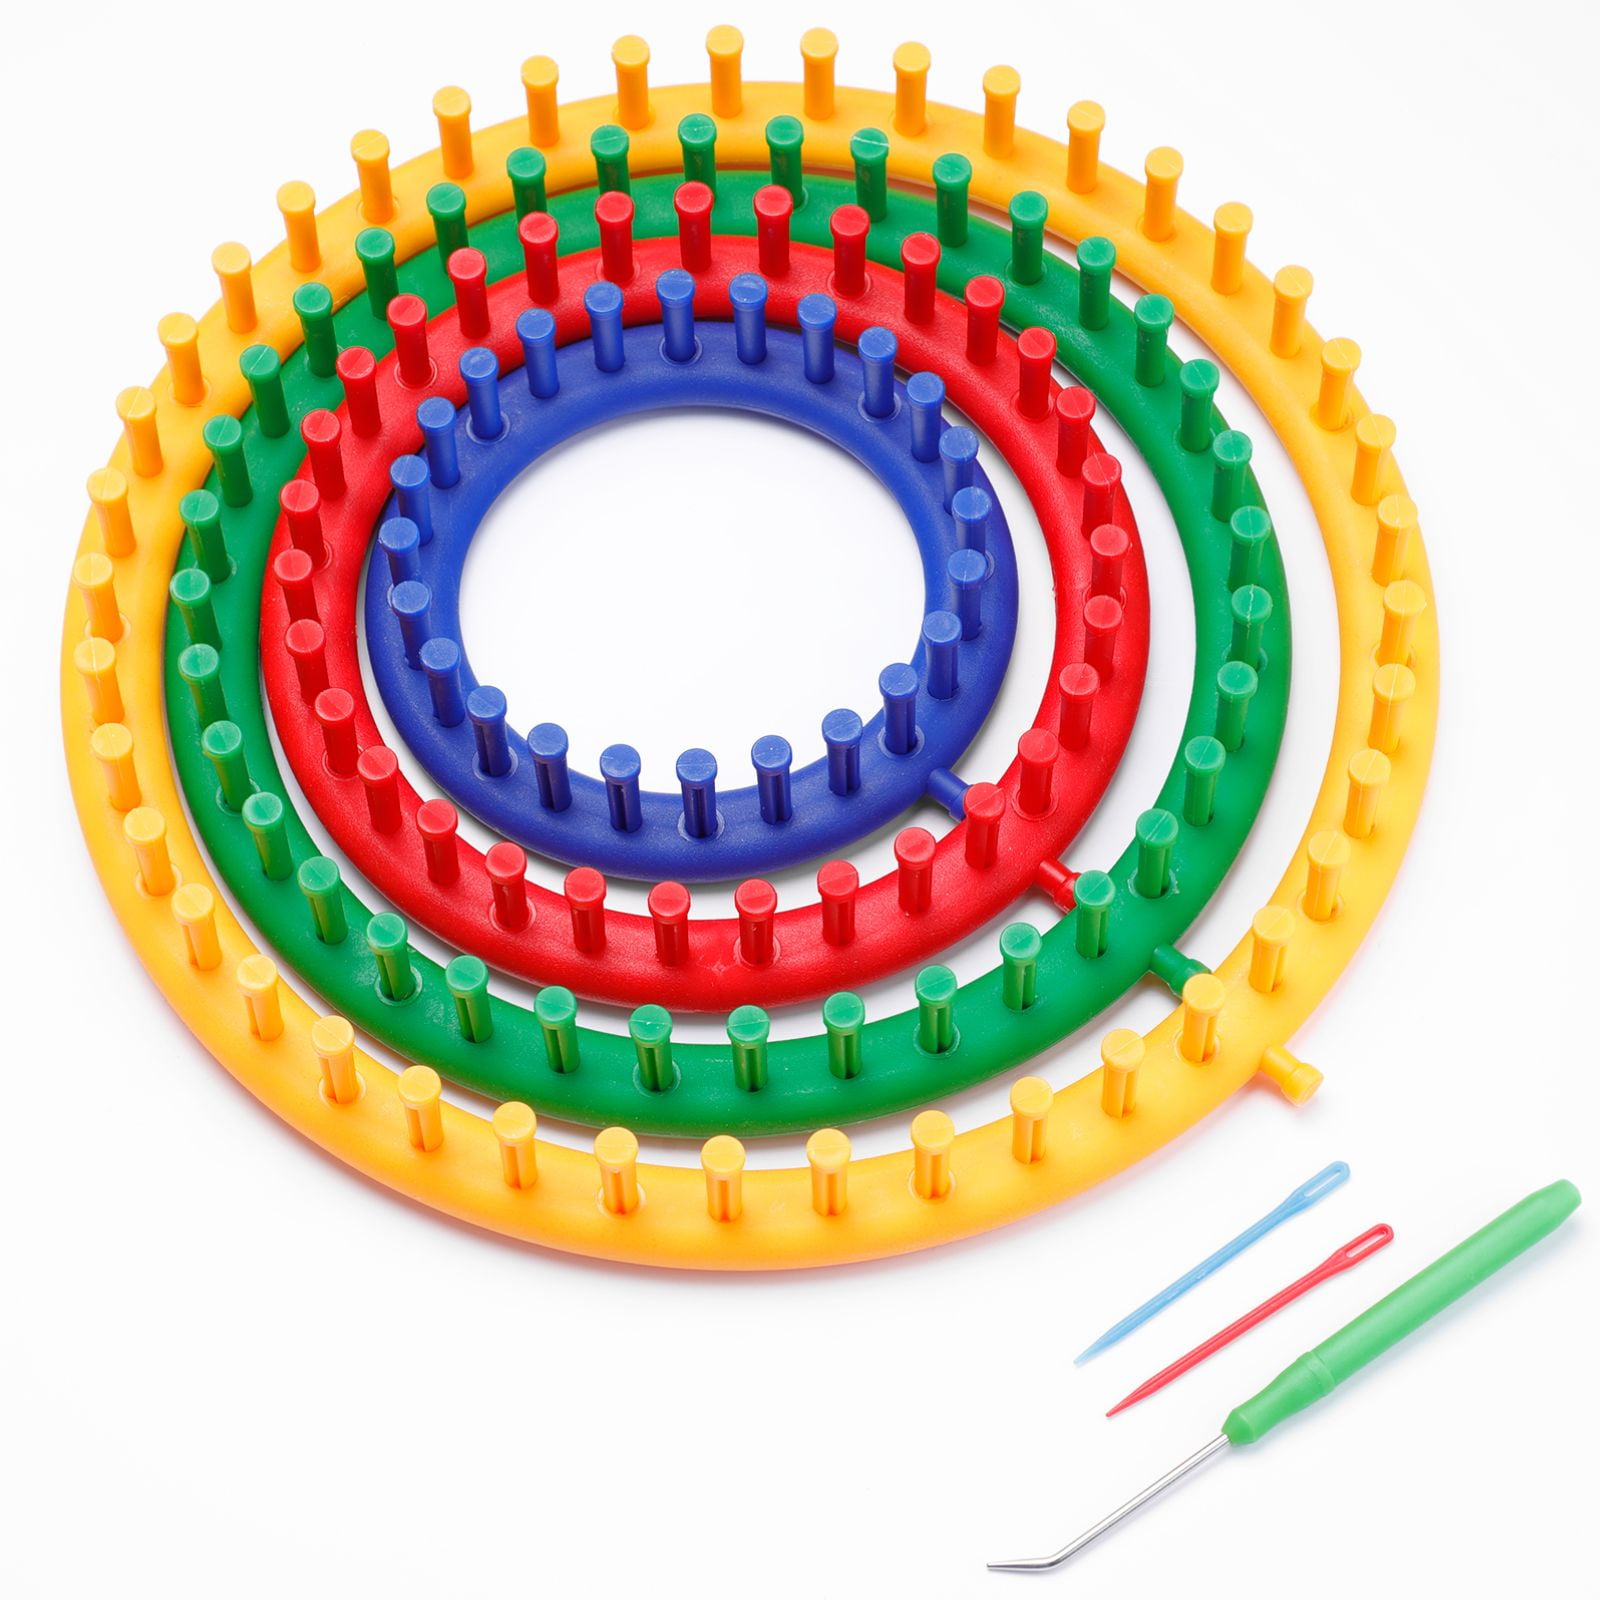 Round Knitting Loom Set - Loom Set of Four Different Sizes Circular Knitting  Looms for Loom Knitting Hats, Scarf ! 